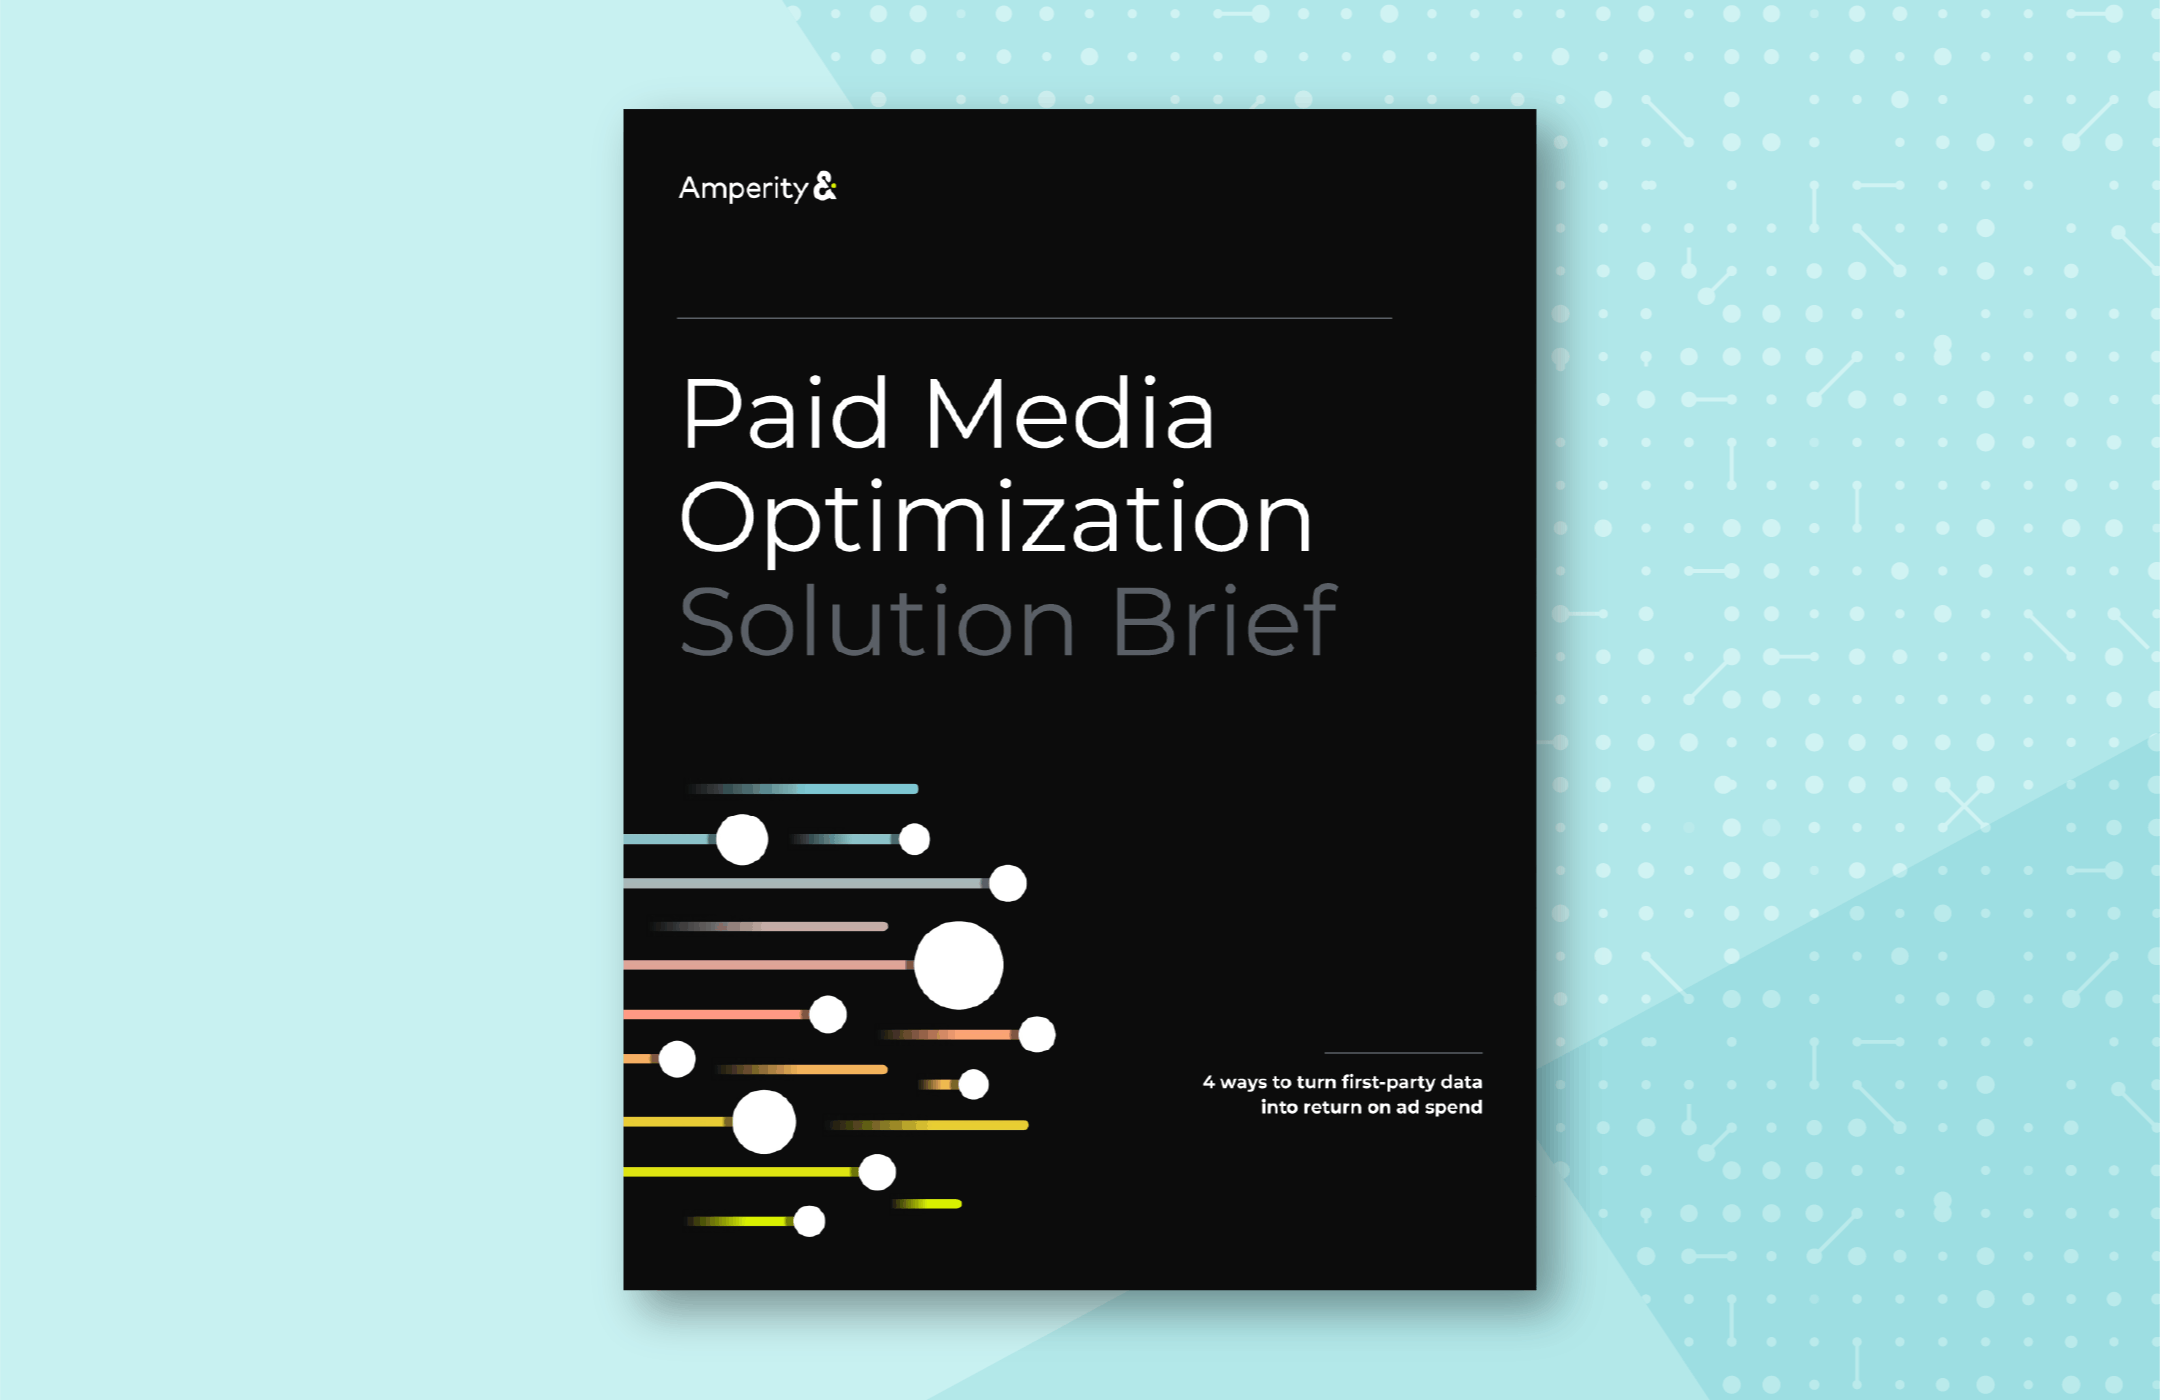 Preview of the front page of the Paid Media Optimization Solution Brief